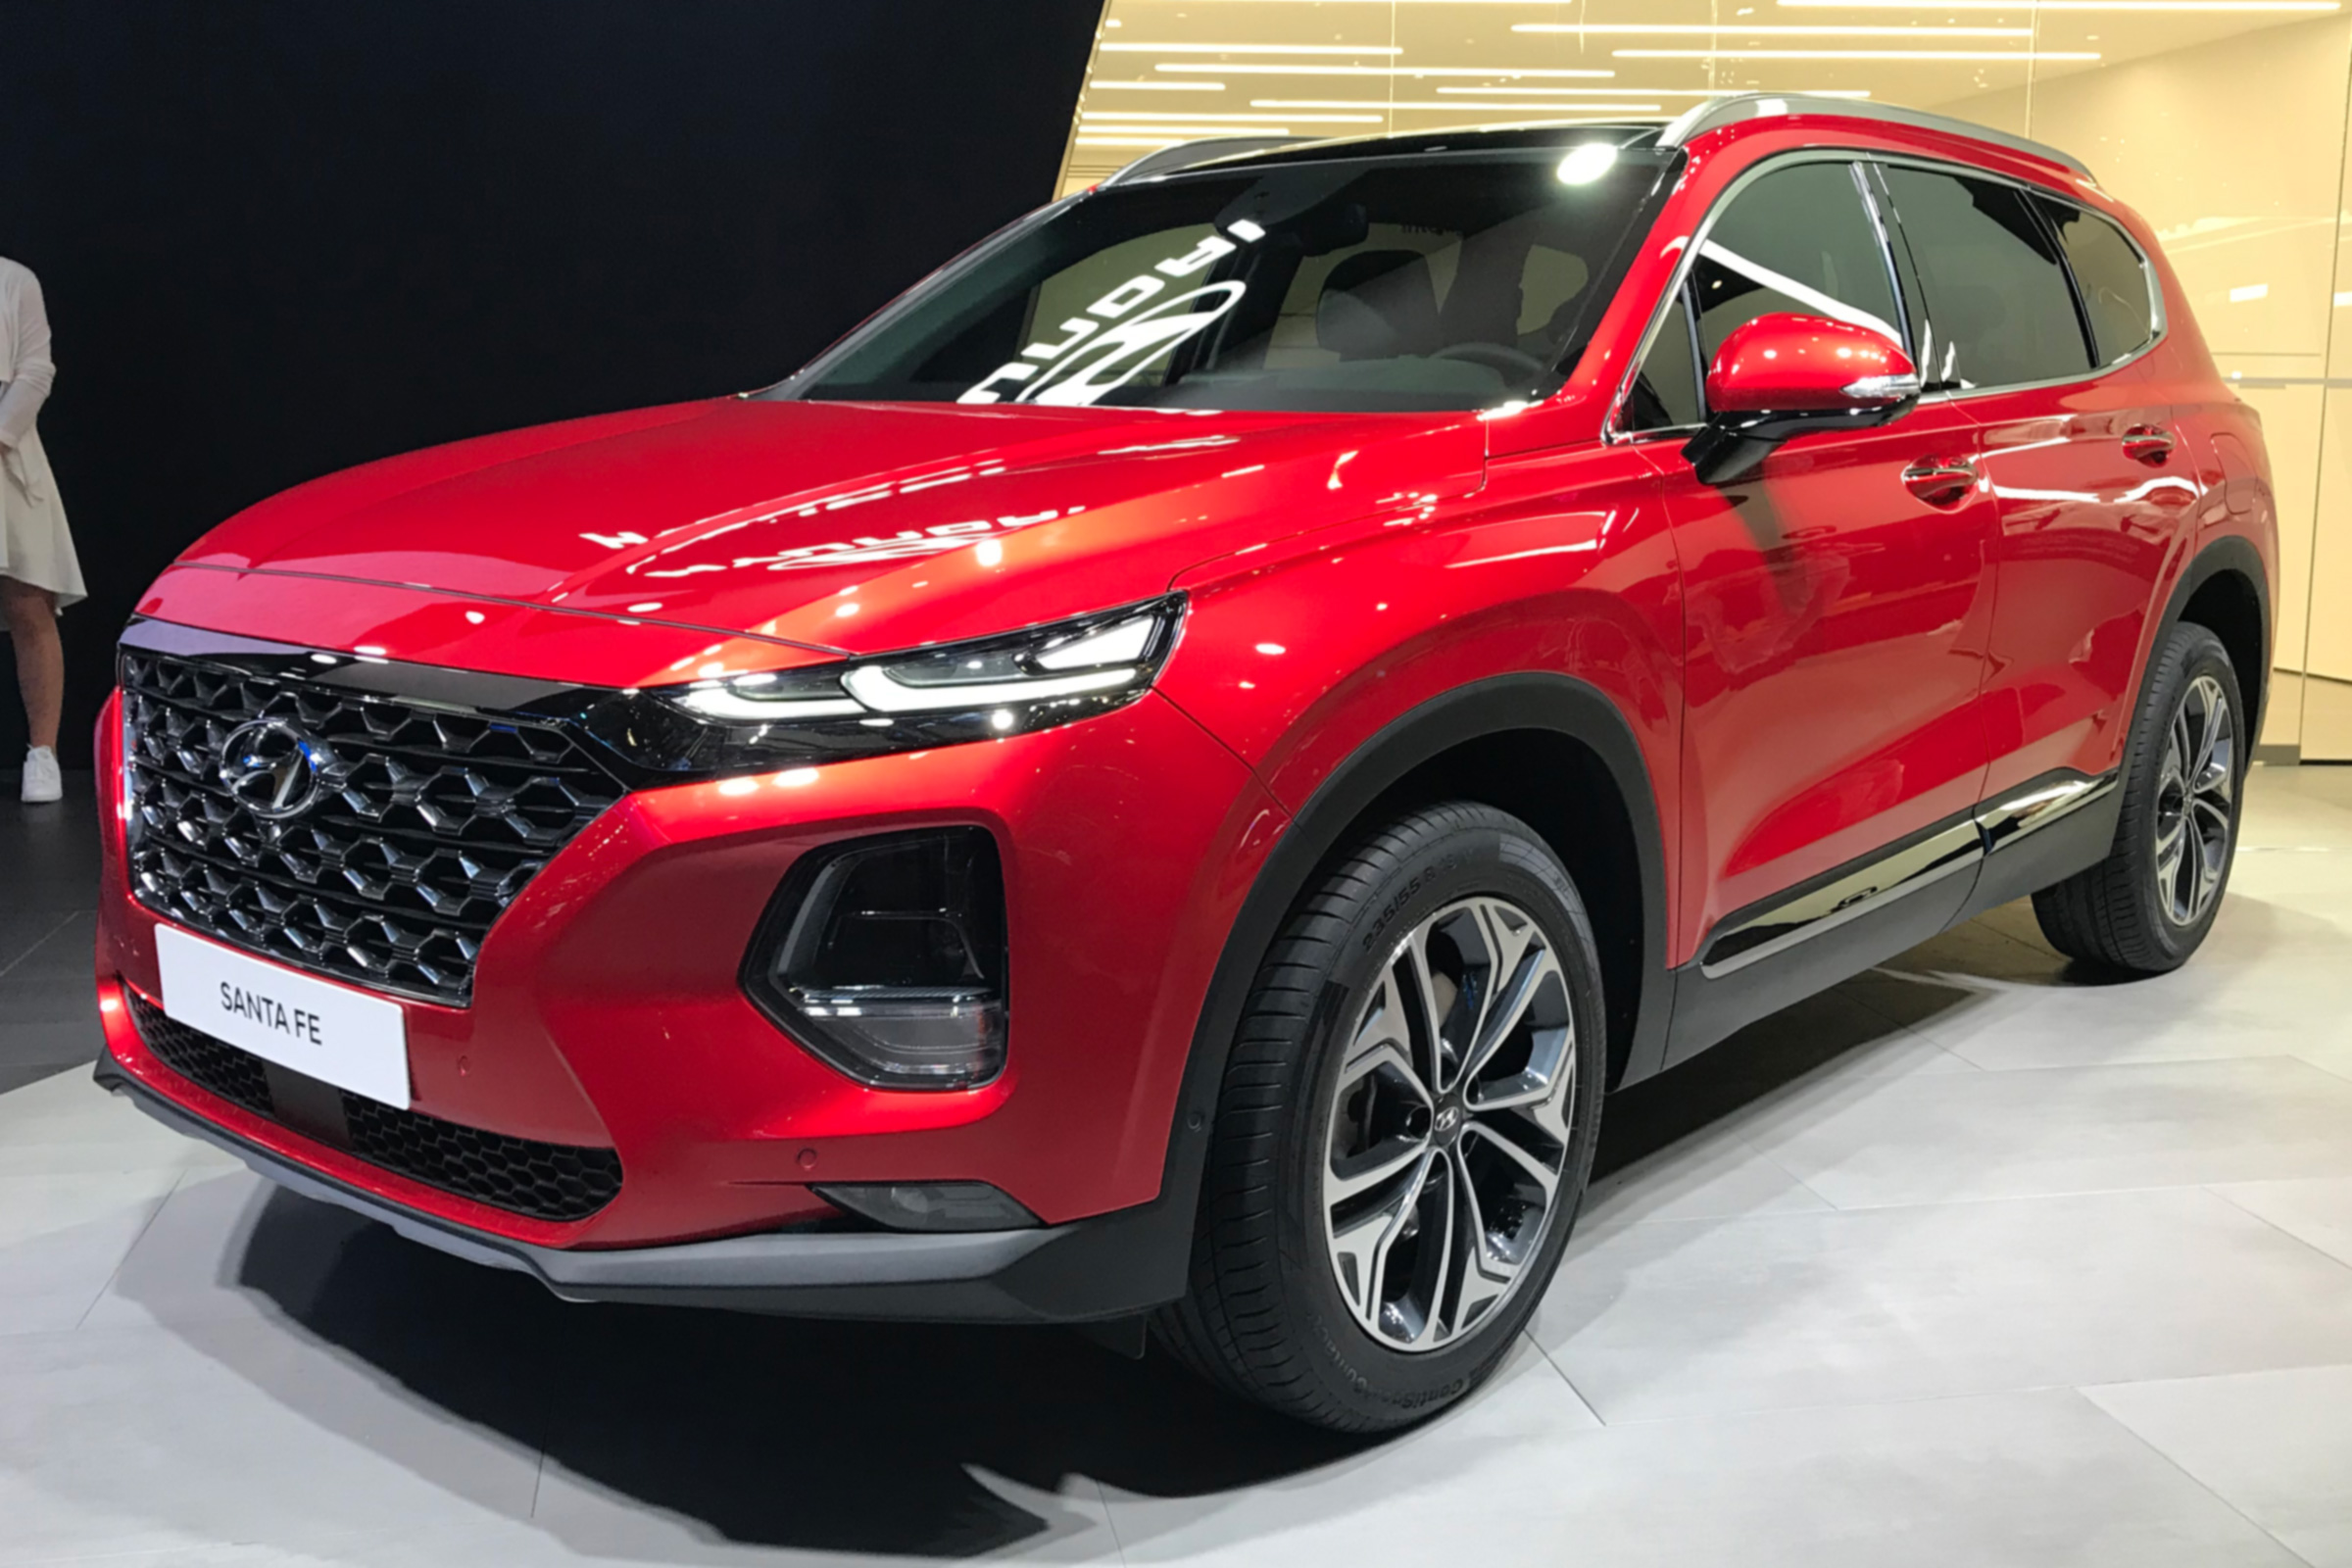 New Hyundai Santa Fe SUV prices and specs confirmed Auto Express